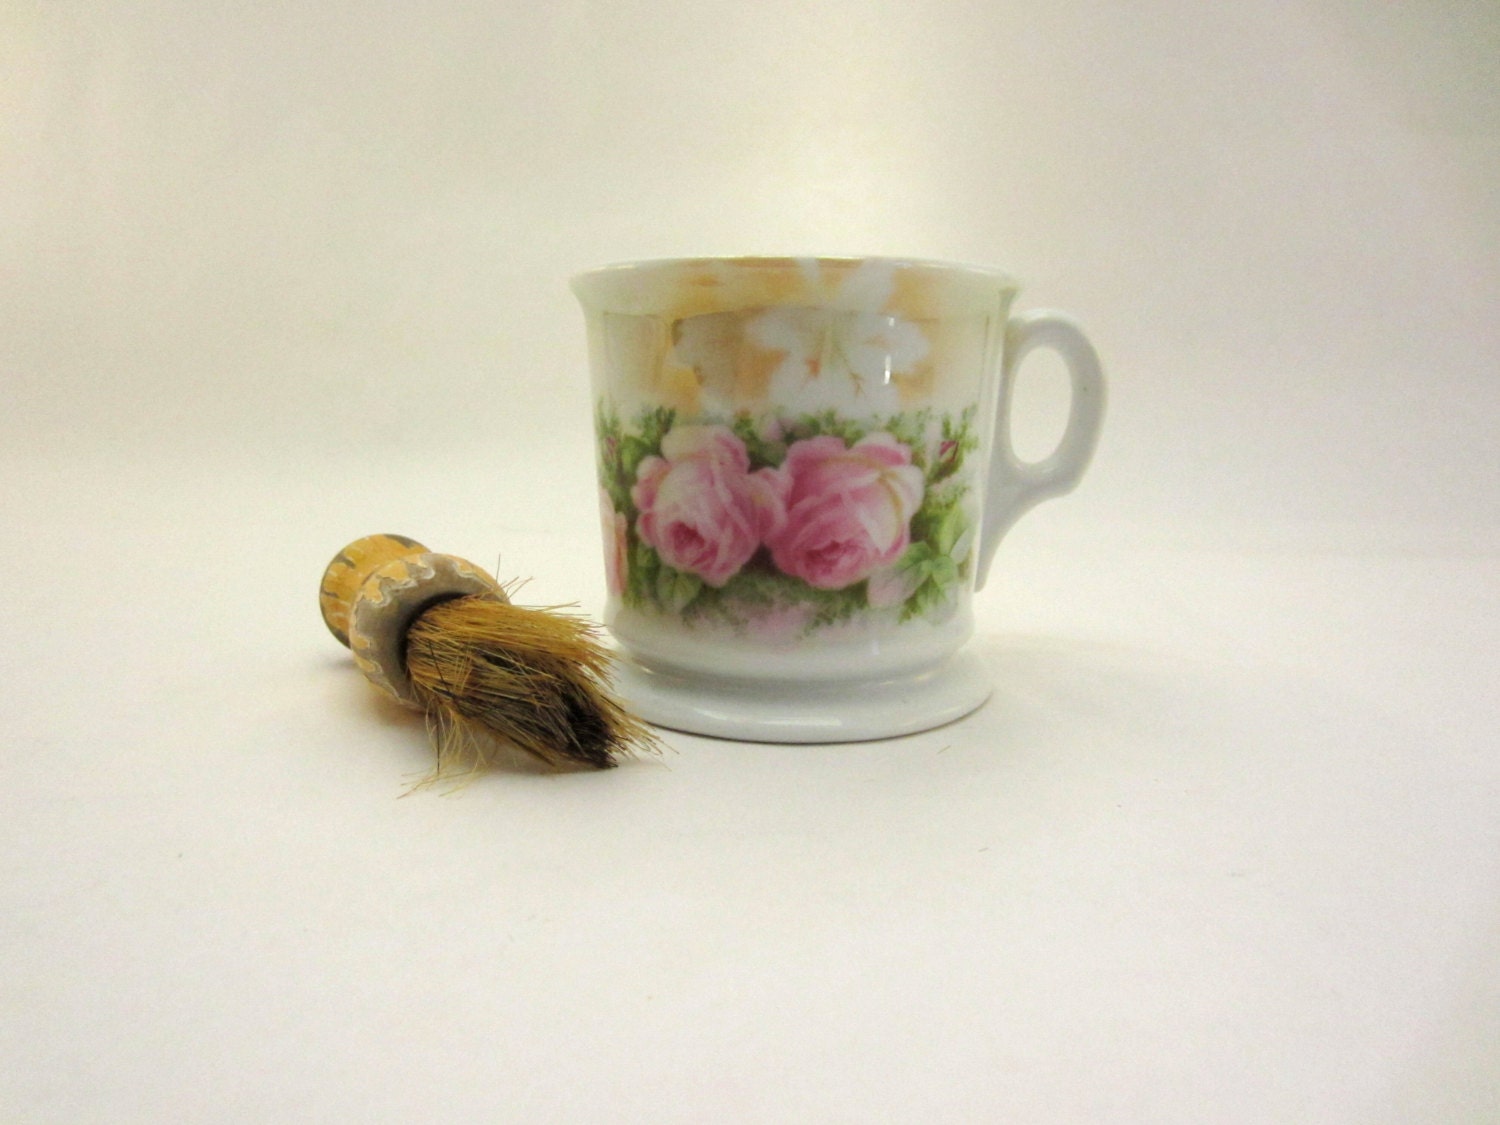 Thewindywillows Etsy cups on Mustache  Cup Vintage mustache vintage by